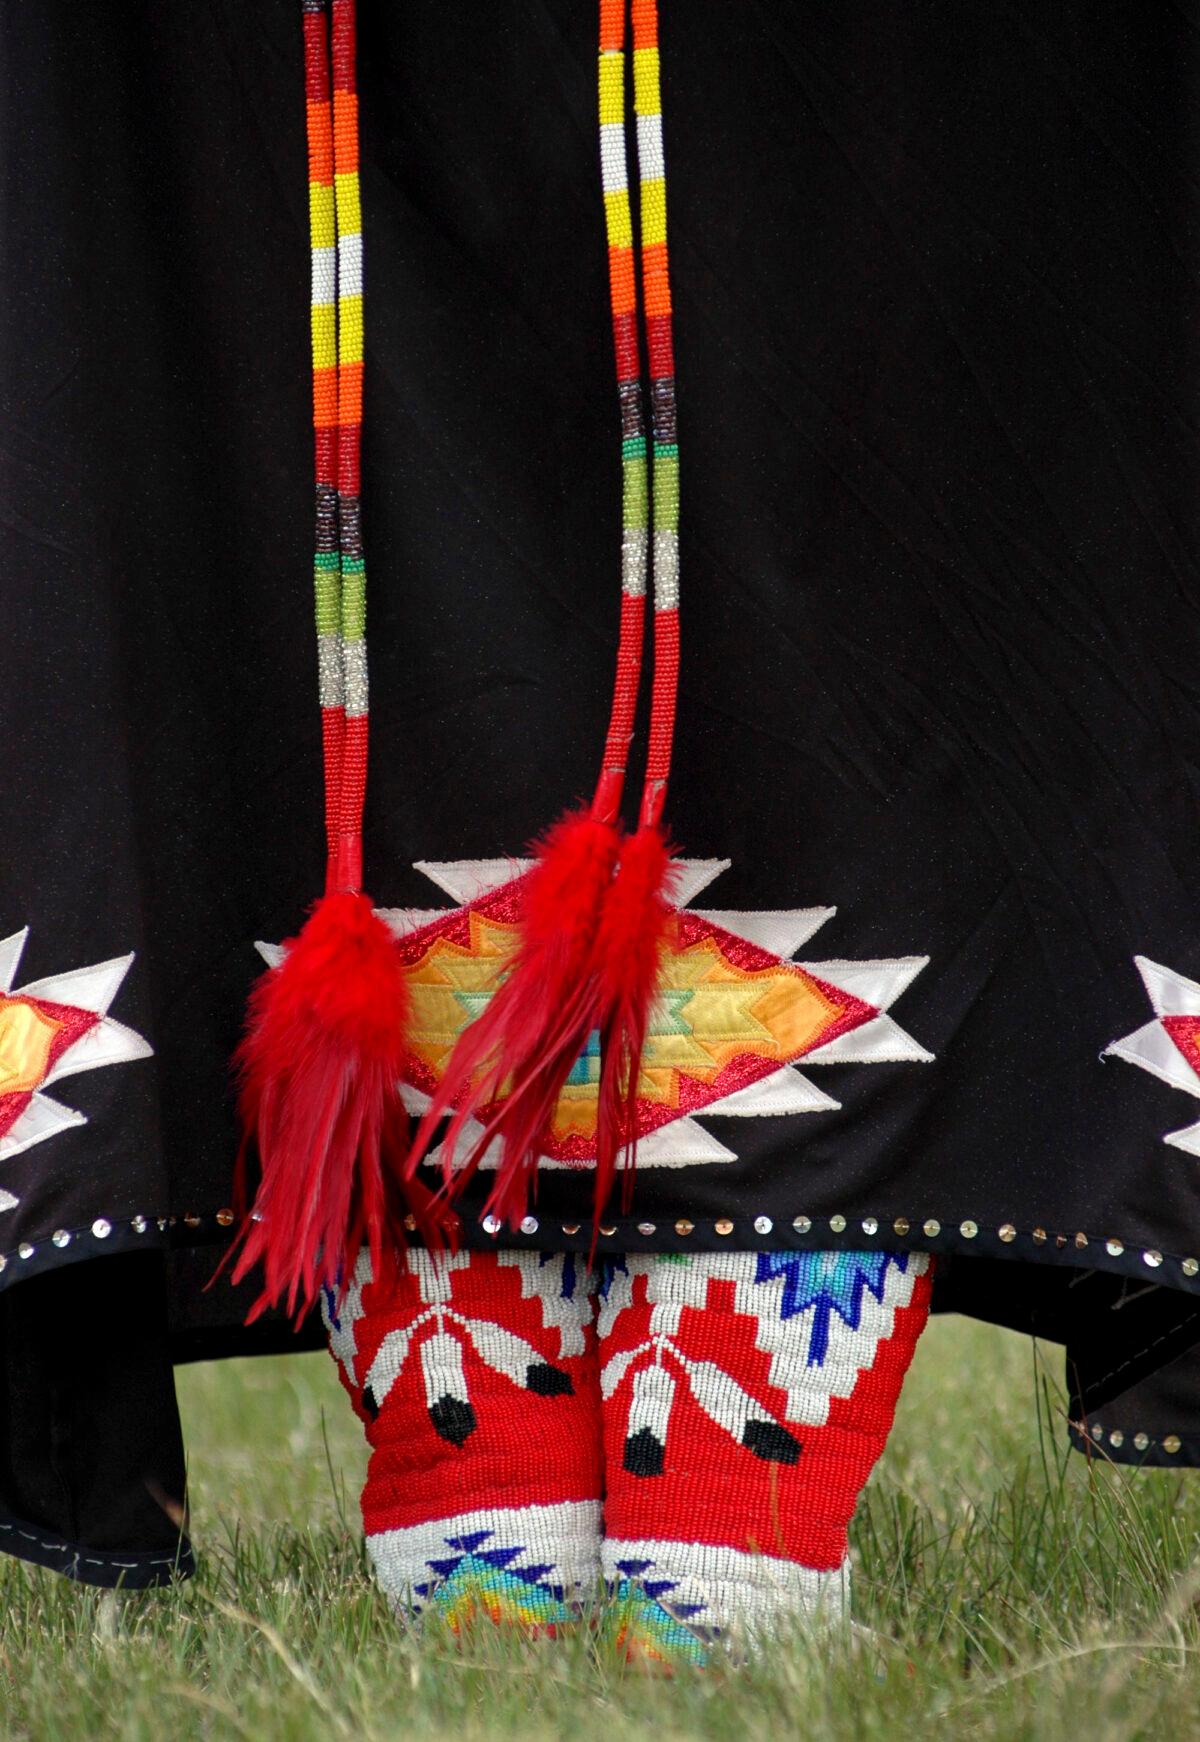 Intricate beadwork and textile patterns on Native American dress. (Kirsten Griffin)